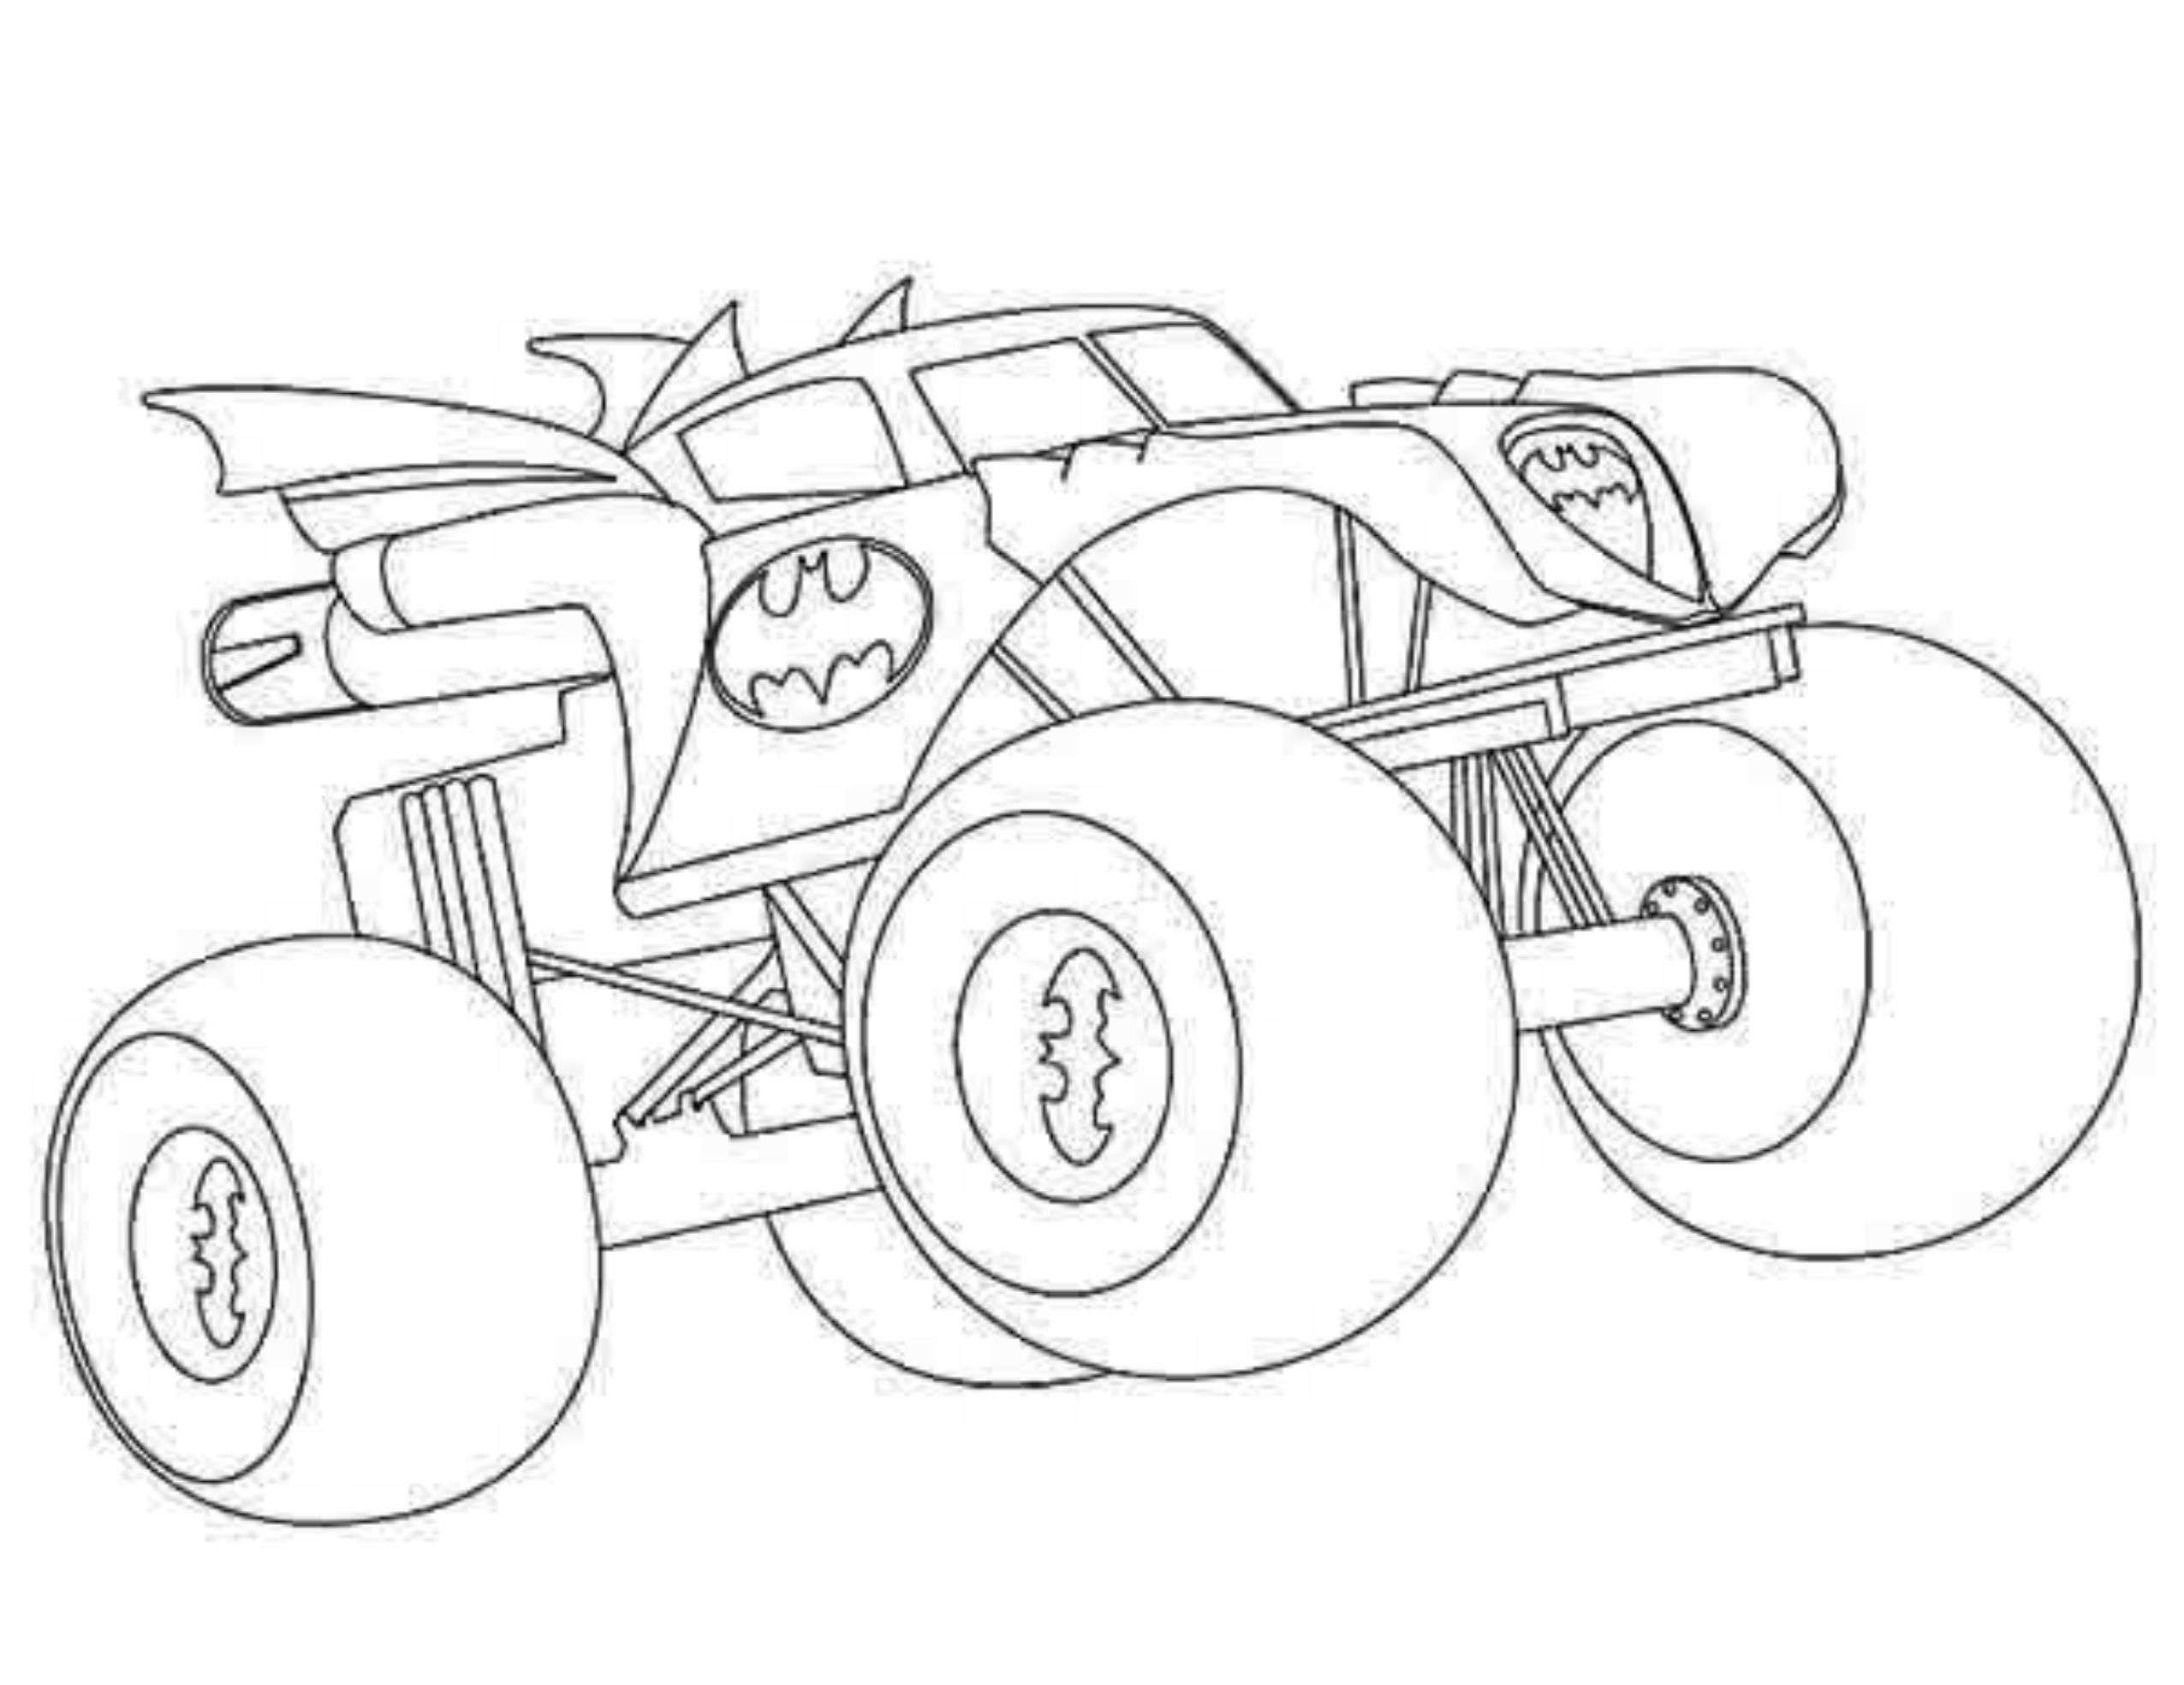 Free Printable Monster Truck Coloring Pages
 Drawing Monster Truck Coloring Pages with Kids